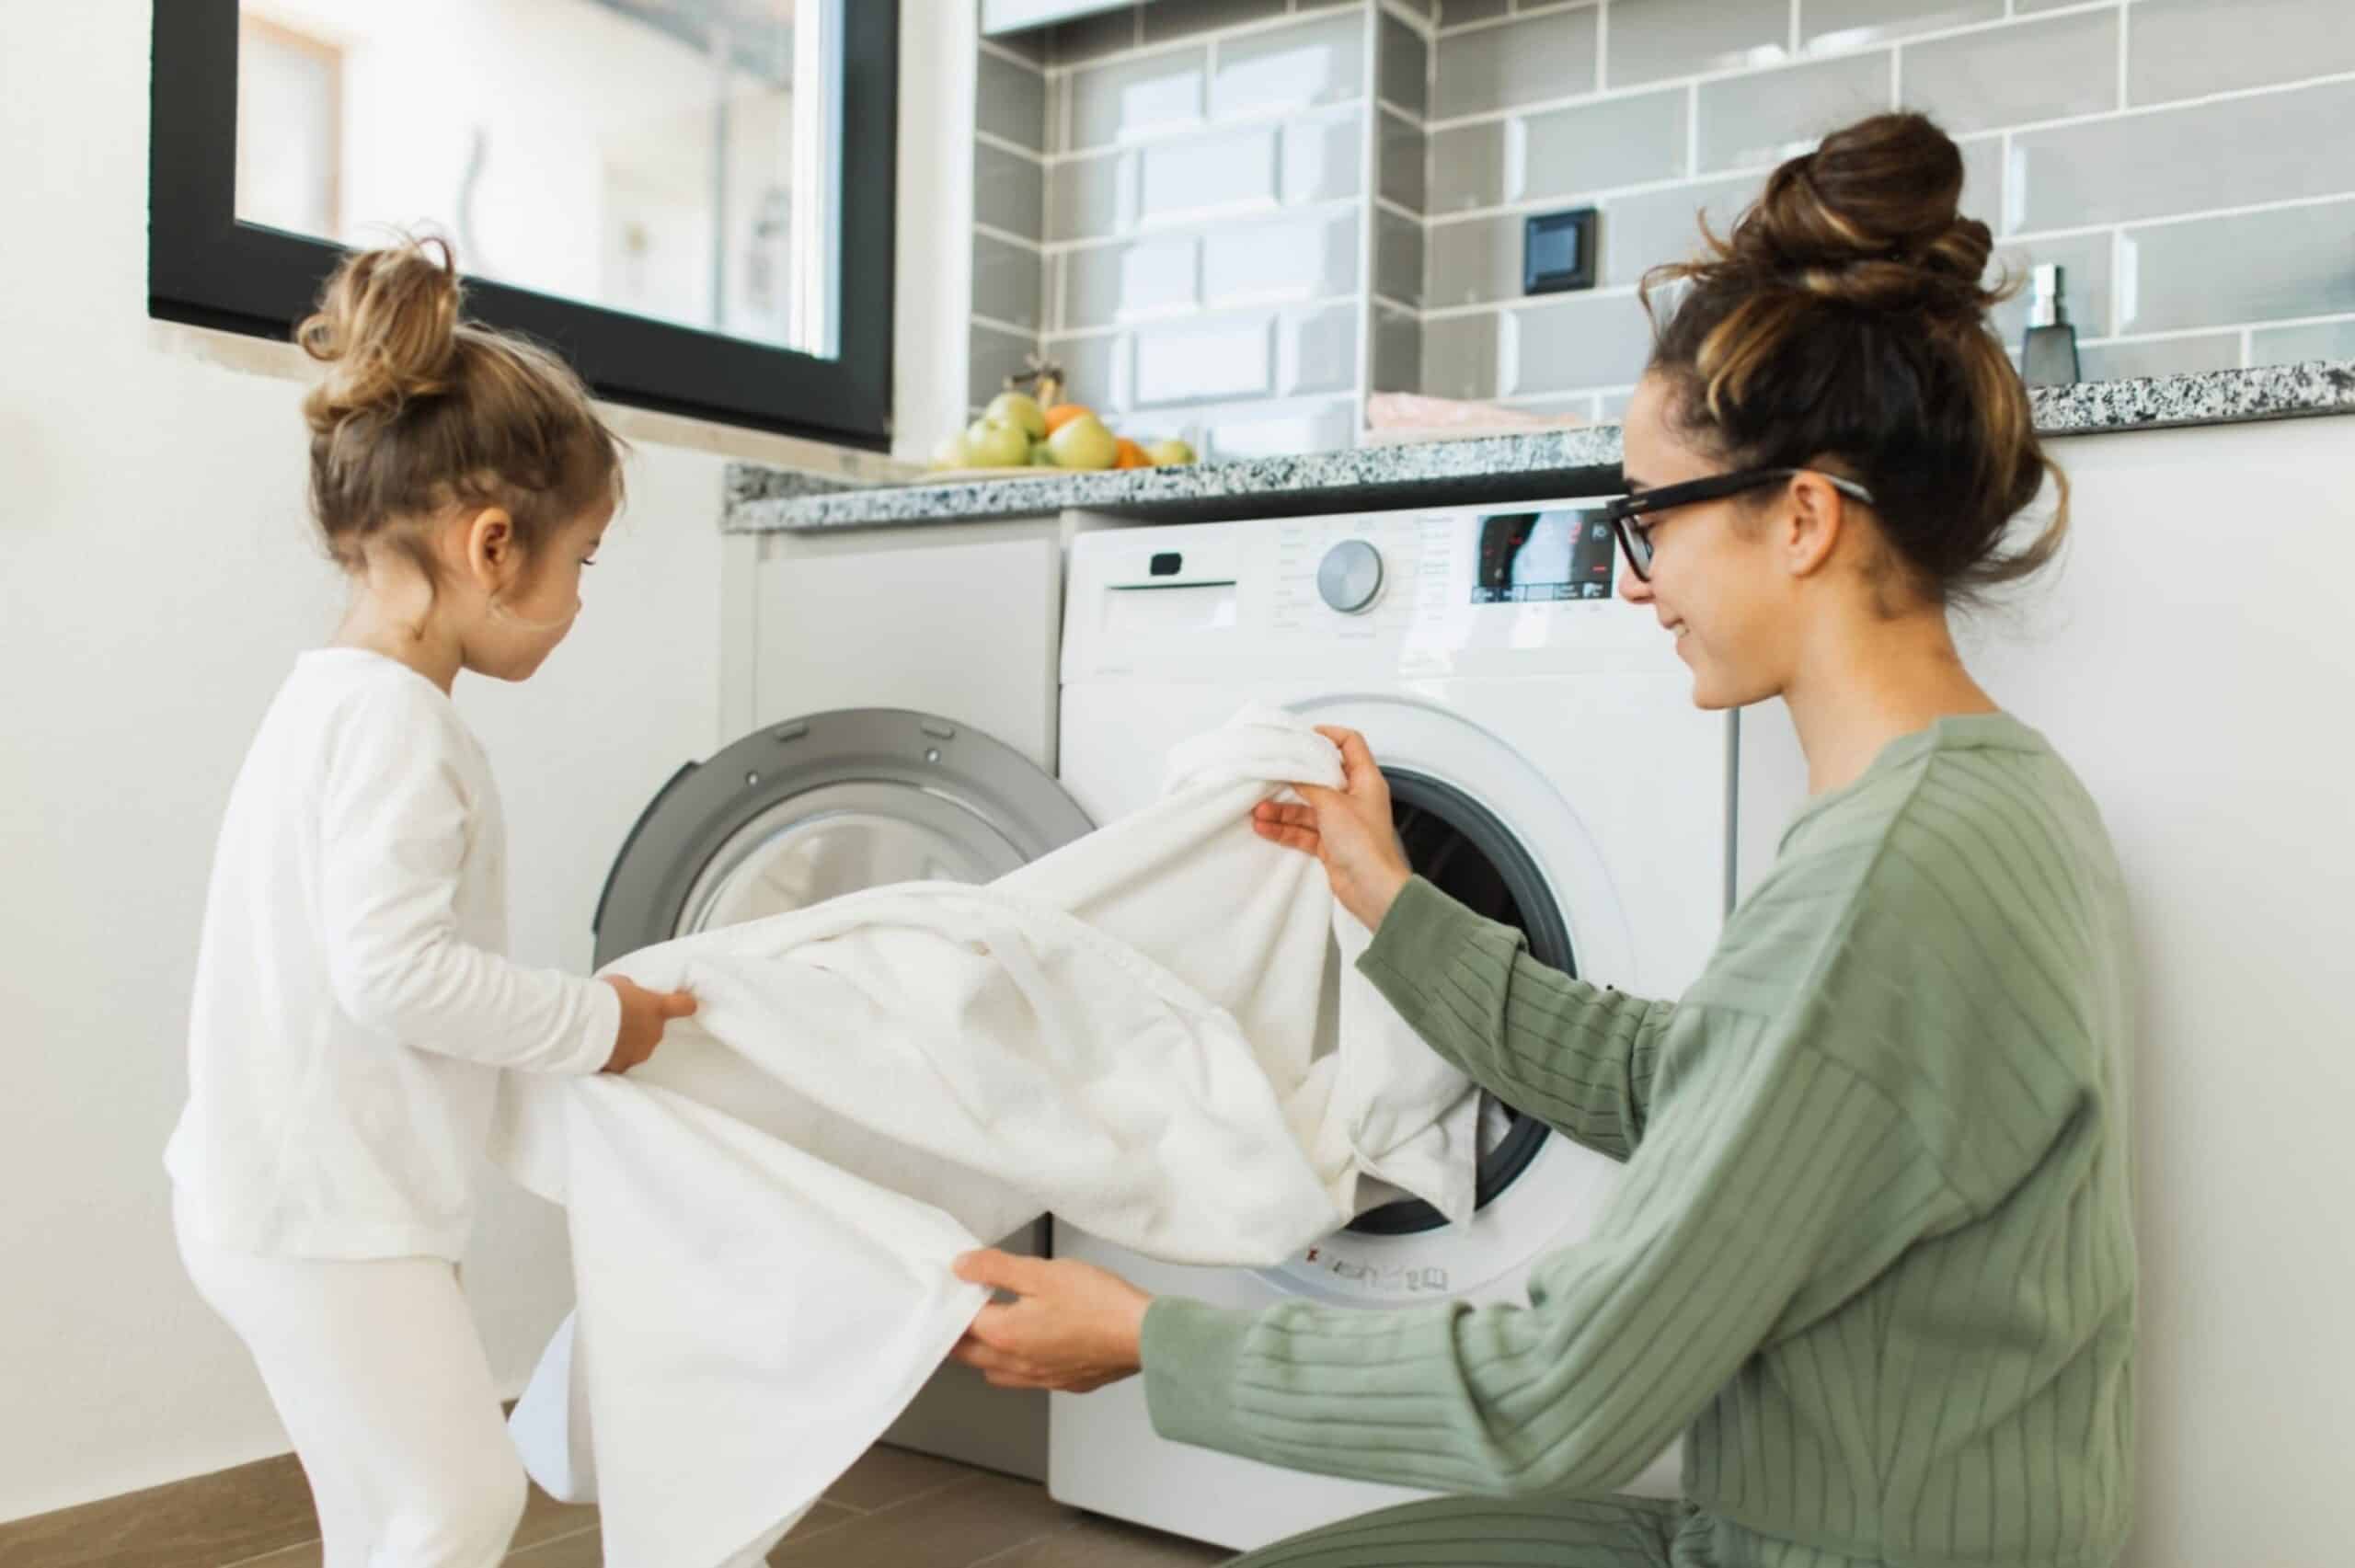 What is Oxybleach and How to Use It Tidyhere Image of Mother and Child Loading Washing Machine